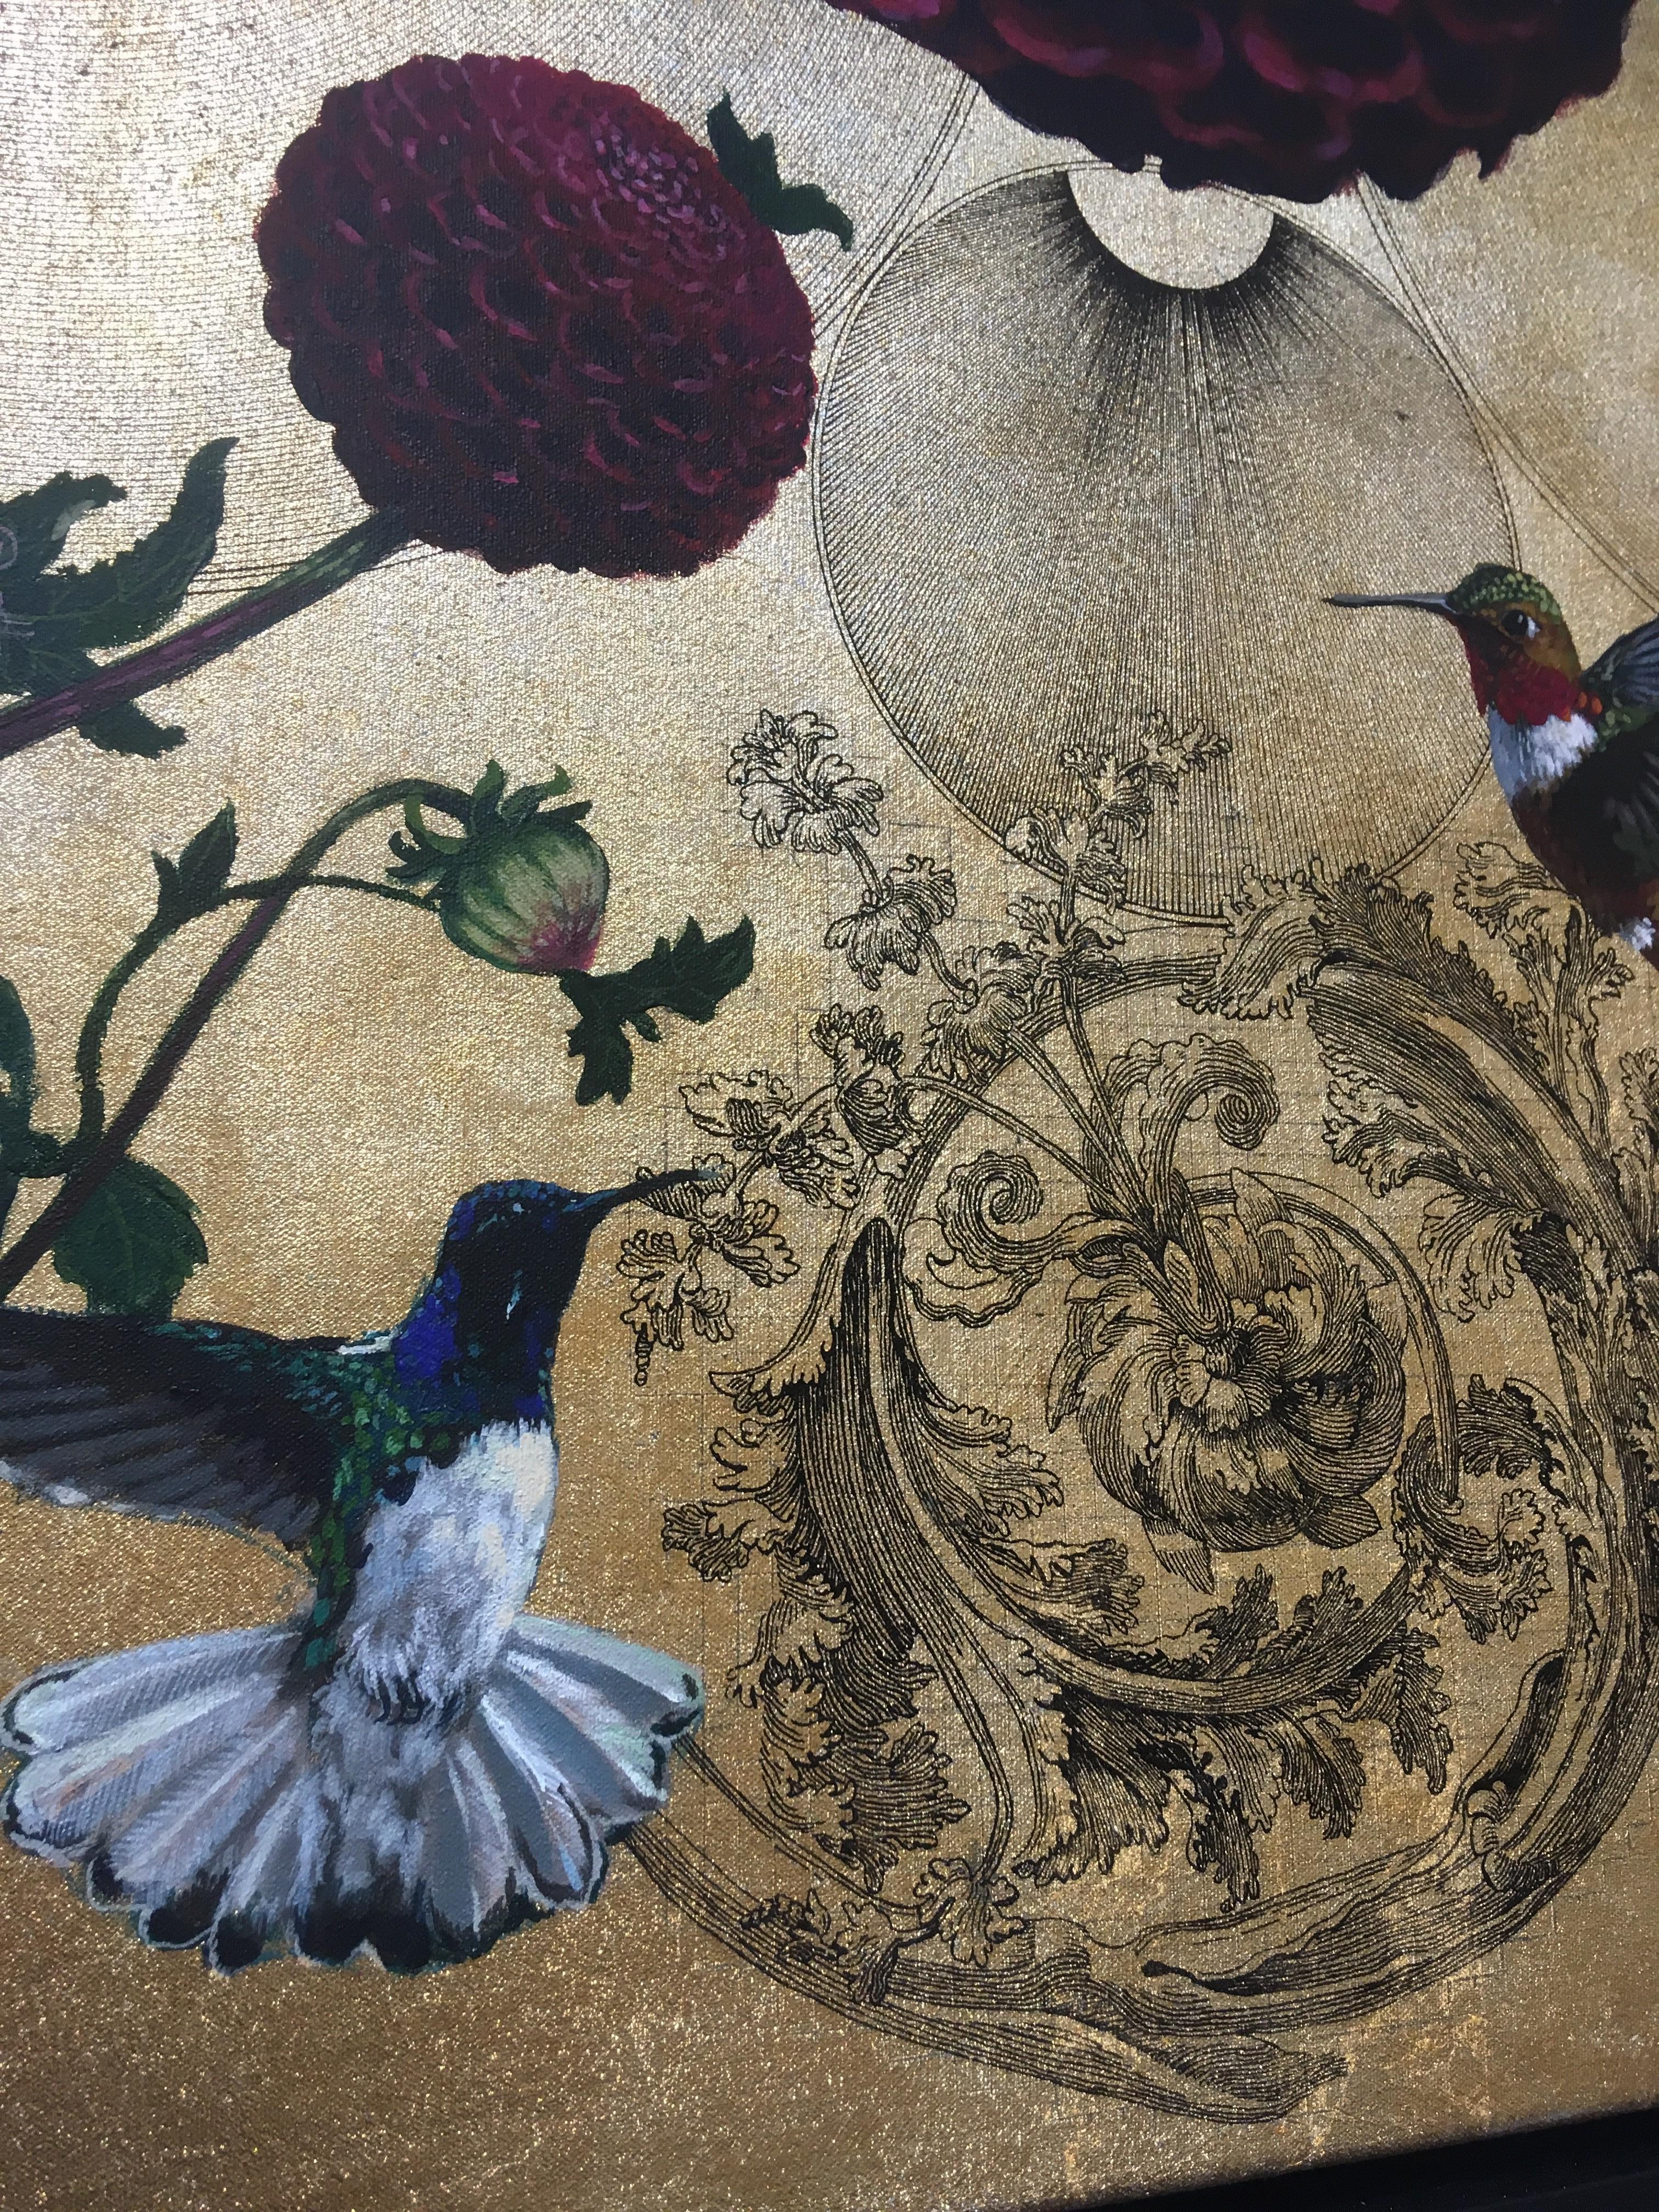 Oro 27 - collaborative work, decorative mixed media with gold, birds and flowers - Contemporary Mixed Media Art by Keng Wai Lee & Marco Araldi